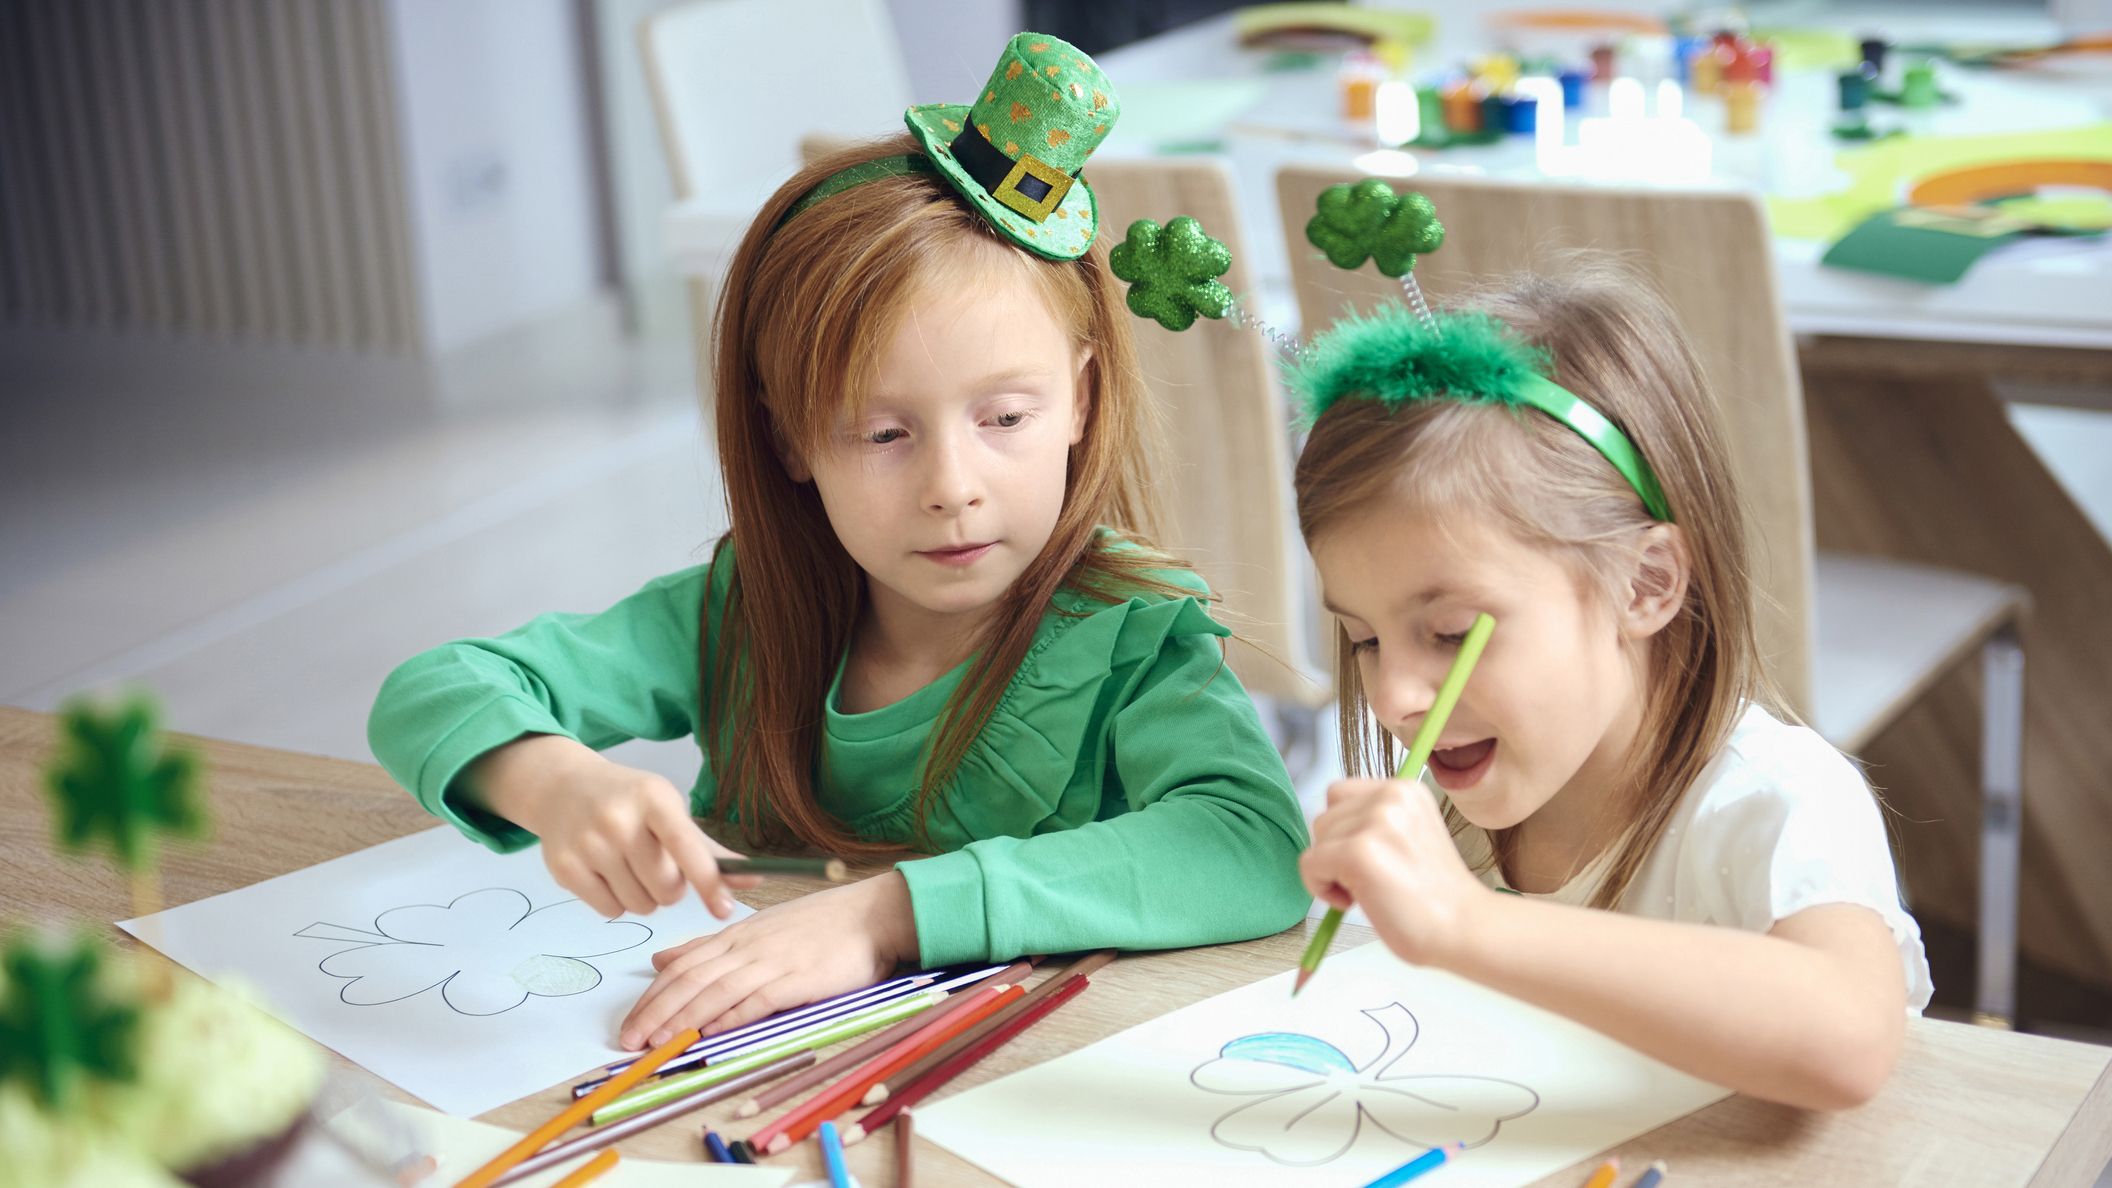 7 Tips to Help You Stick to Recovery this St. Patrick's Day